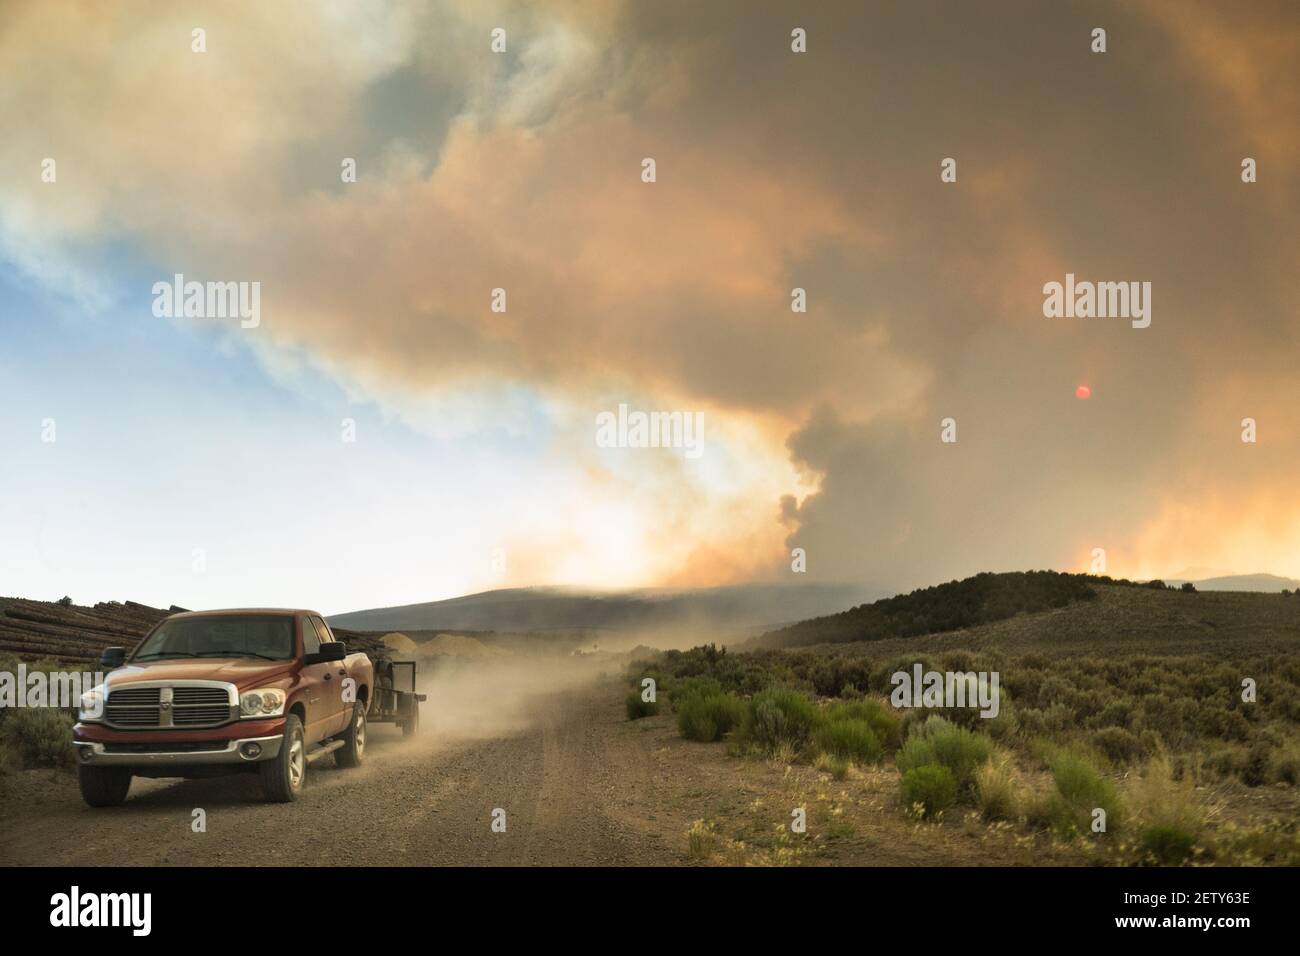 Smoke from the Brian Head wildfire pours over the evacuated town of Panguitch near Bryce Canyon National Park in Utah on June 28, 2017. The fire, which began on June 17 at the resort town Brian Head along the Utah-Idaho border, is now the largest active wildfire in the US at 78 square miles. It has burned 13 homes and forced the evacuation of over 1,500 people. (Photo by Annabelle Marcovici) *** Please Use Credit from Credit Field *** *** Please Use Credit from Credit Field *** Stock Photo